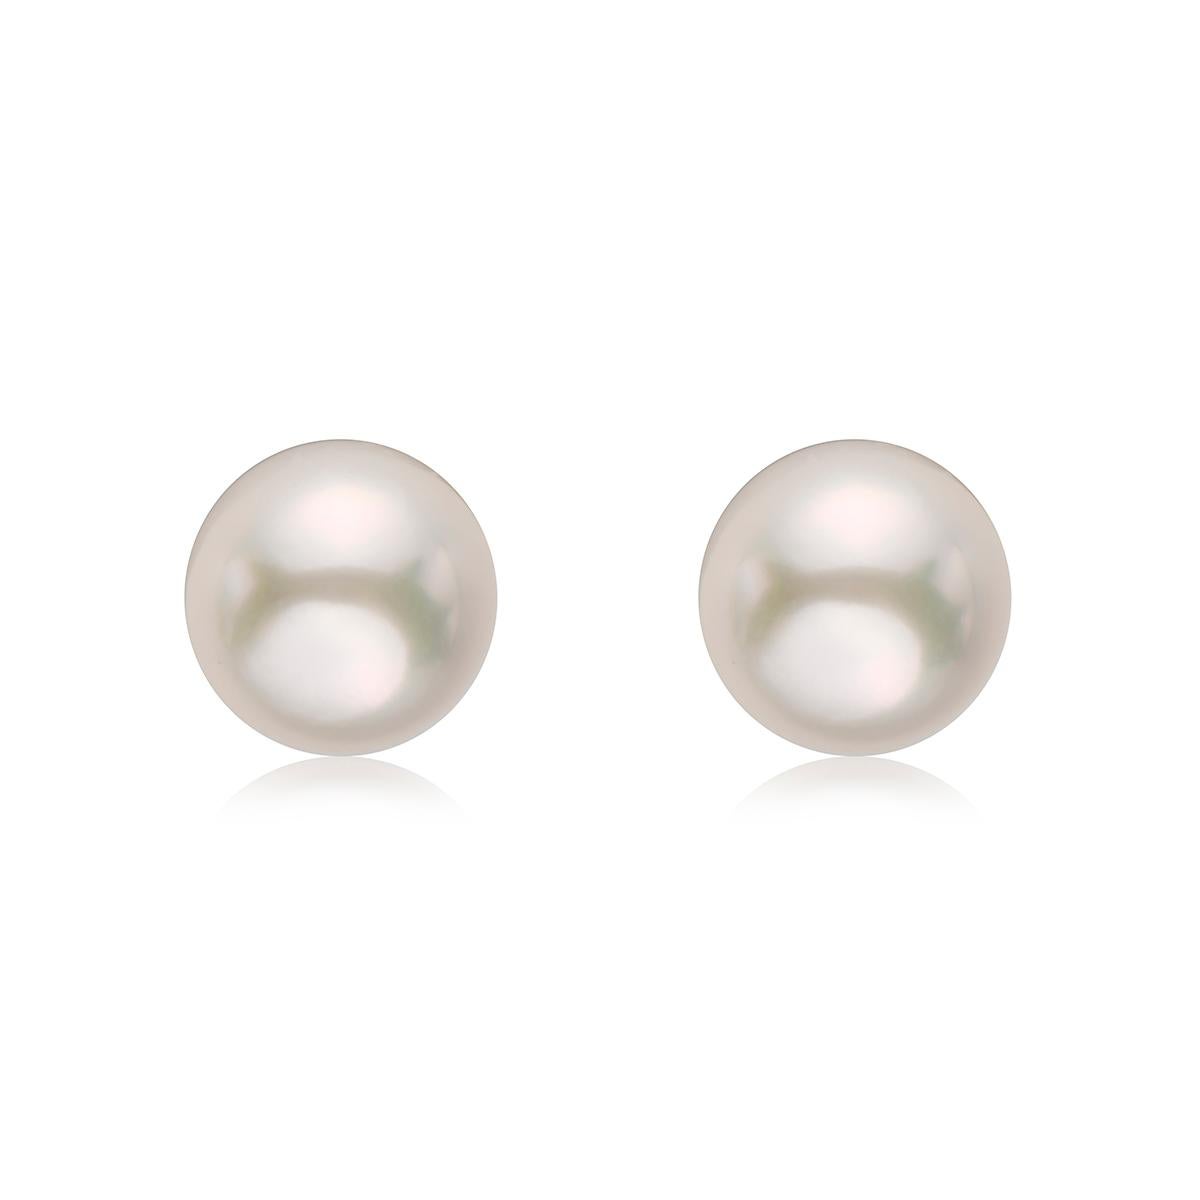 These stud earrings feature Japanese Akoya pearls measuring 5-5.5mm set on 14K White Gold. Classic yet very unique and rare, these are a must for any jewelry collection.
AN ELEGANT EXPRESSION – This gorgeous cultured pearl jewelry adds a luminous